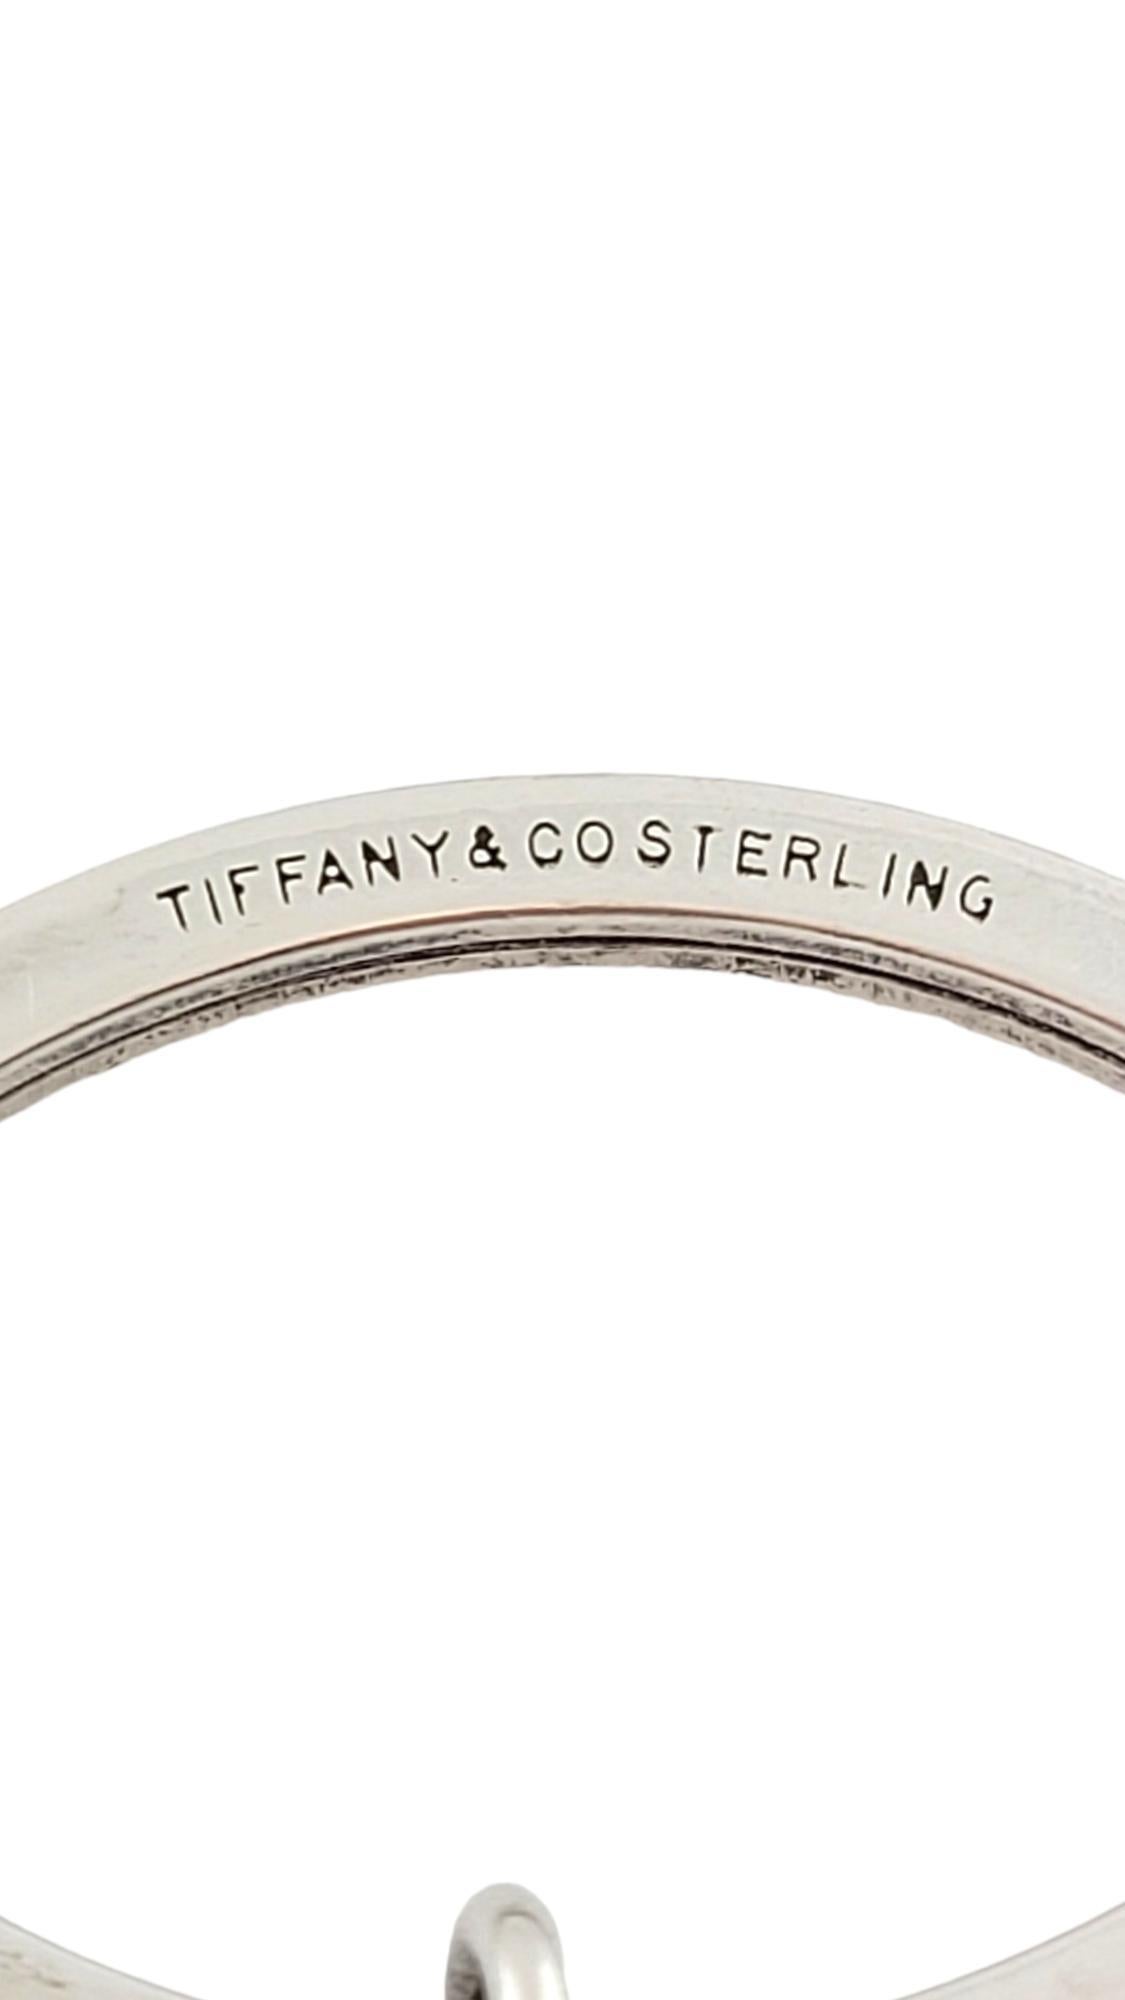 Tiffany & Co 925 Sterling Silver Oval Key Ring with Tag #17410 For Sale 1